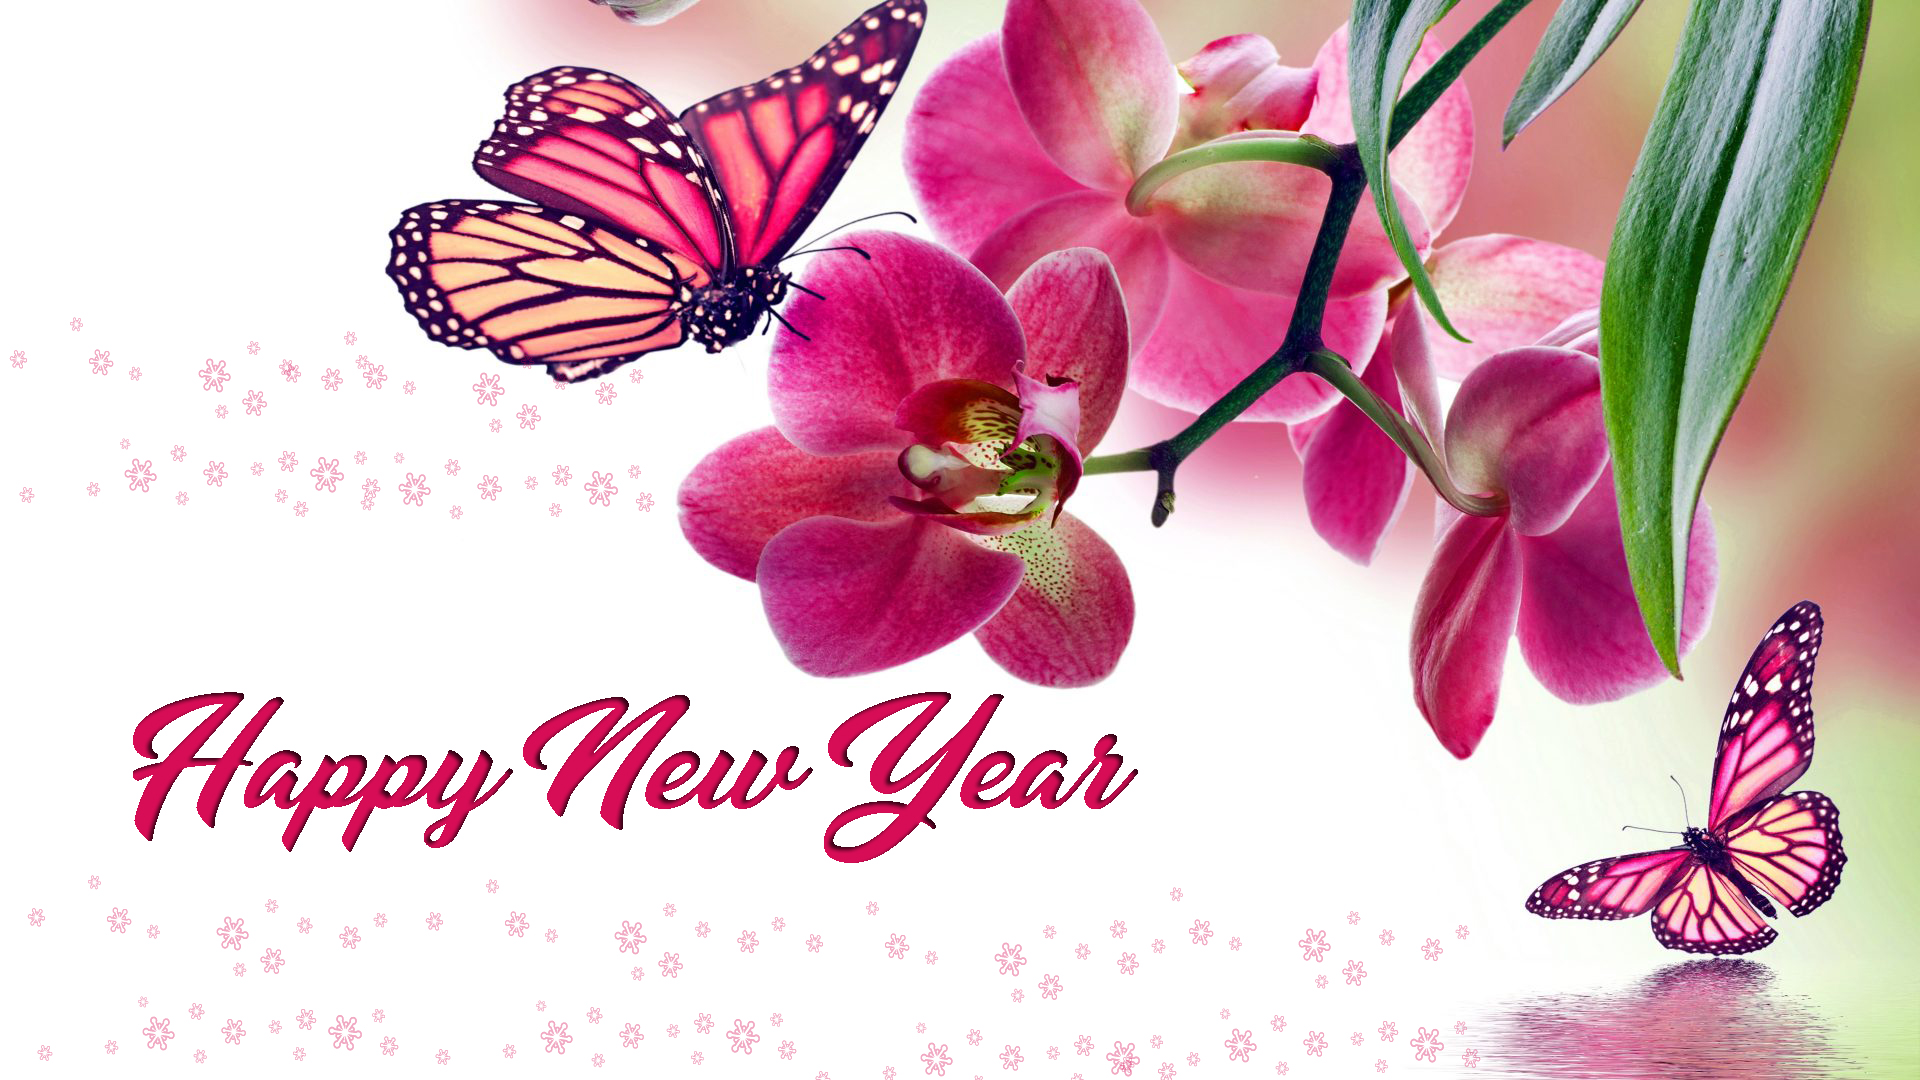 Beautiful Happy New Year 2018 Wishes&Greetings Images - 9to5 Car Wallpapers